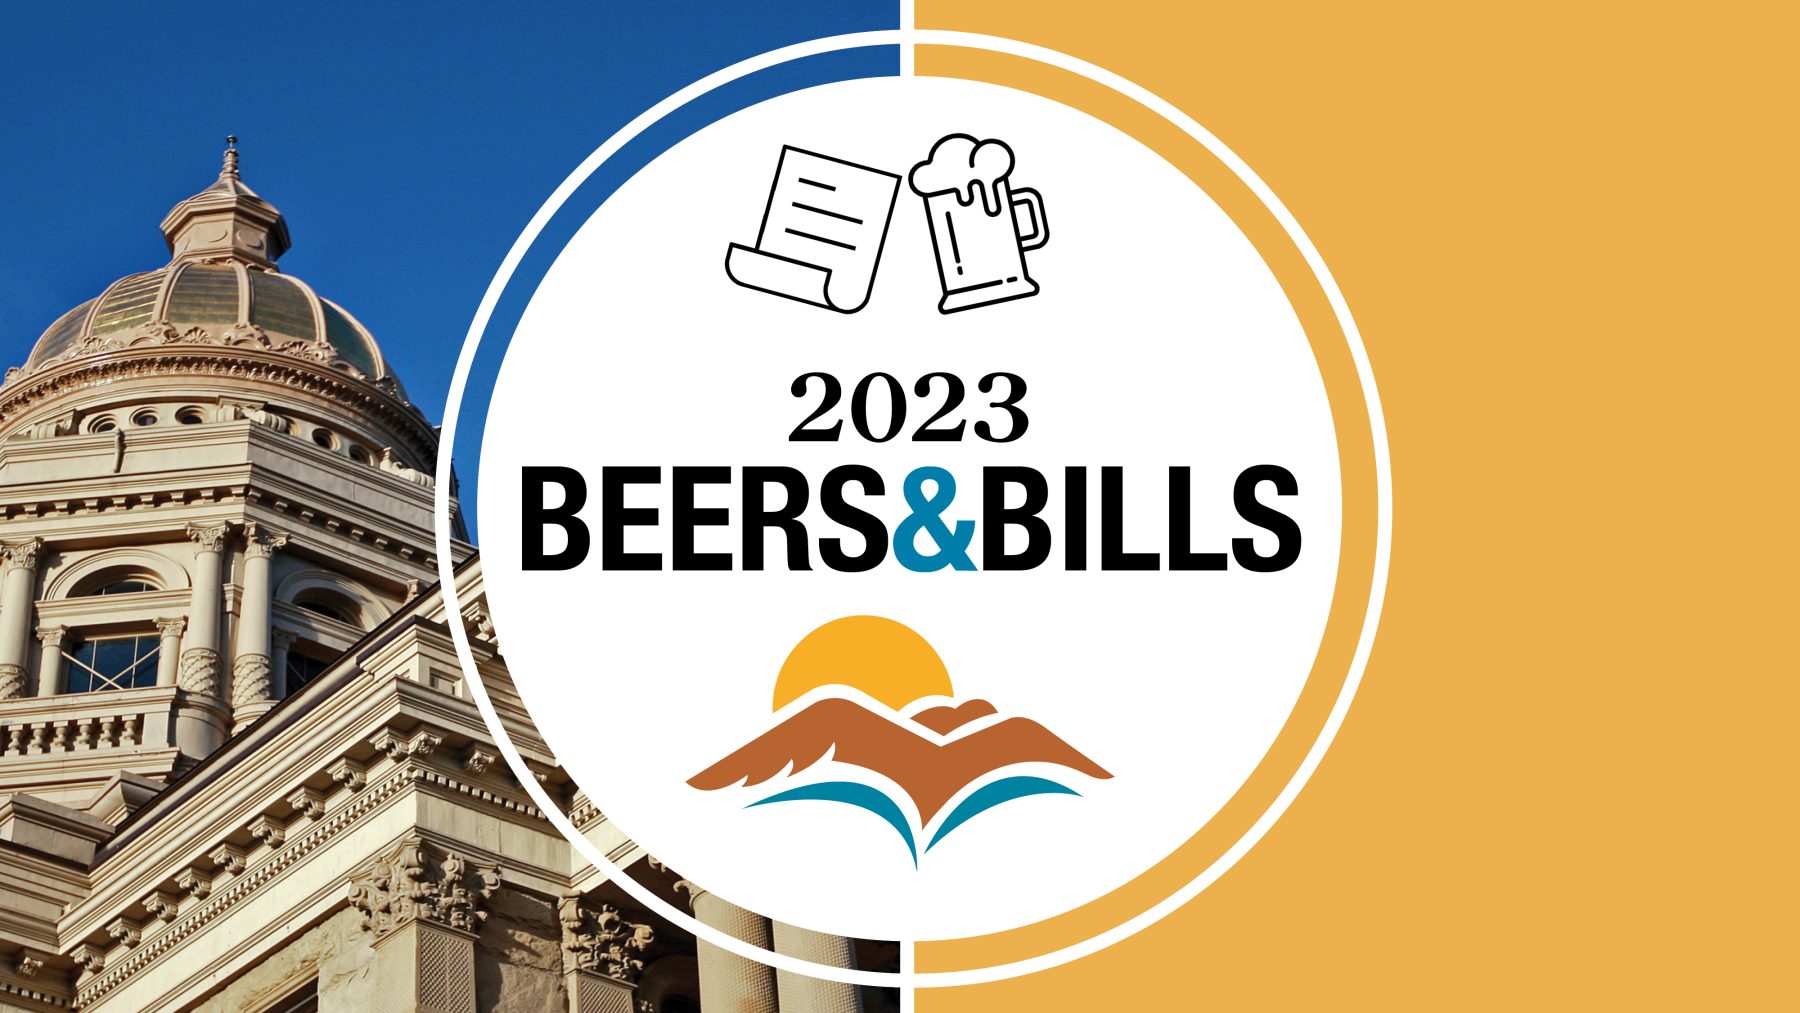 Beers & Bills is coming to a town near you!